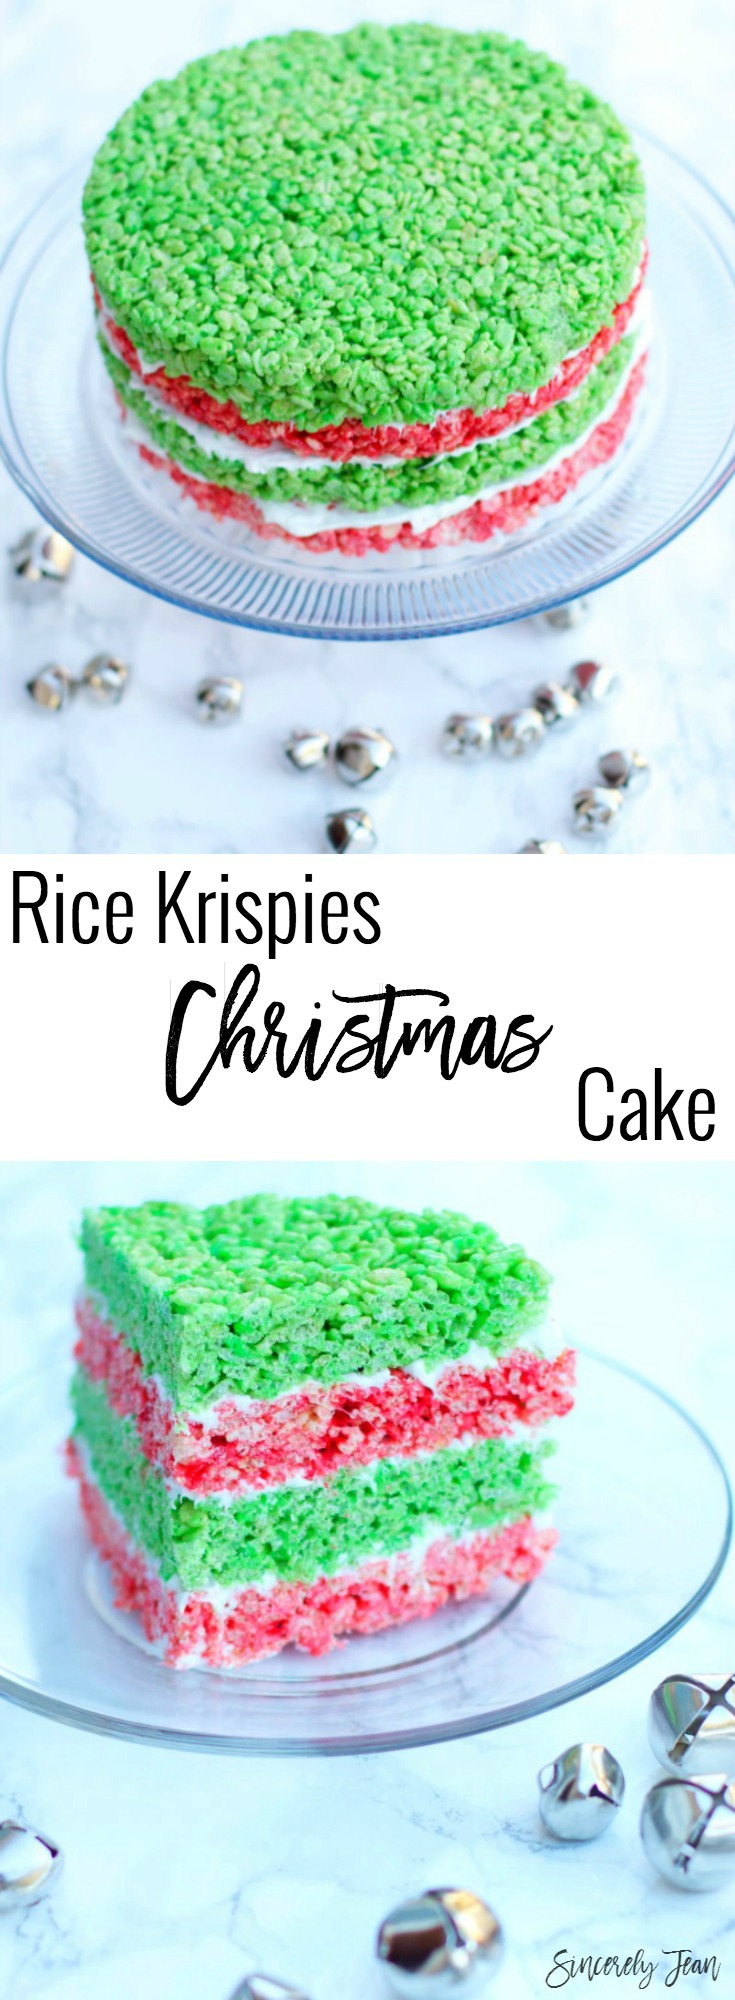 SincerelyJean.com brings you a delicious Dessert Cake with Rice Krispies Treats for Christmas